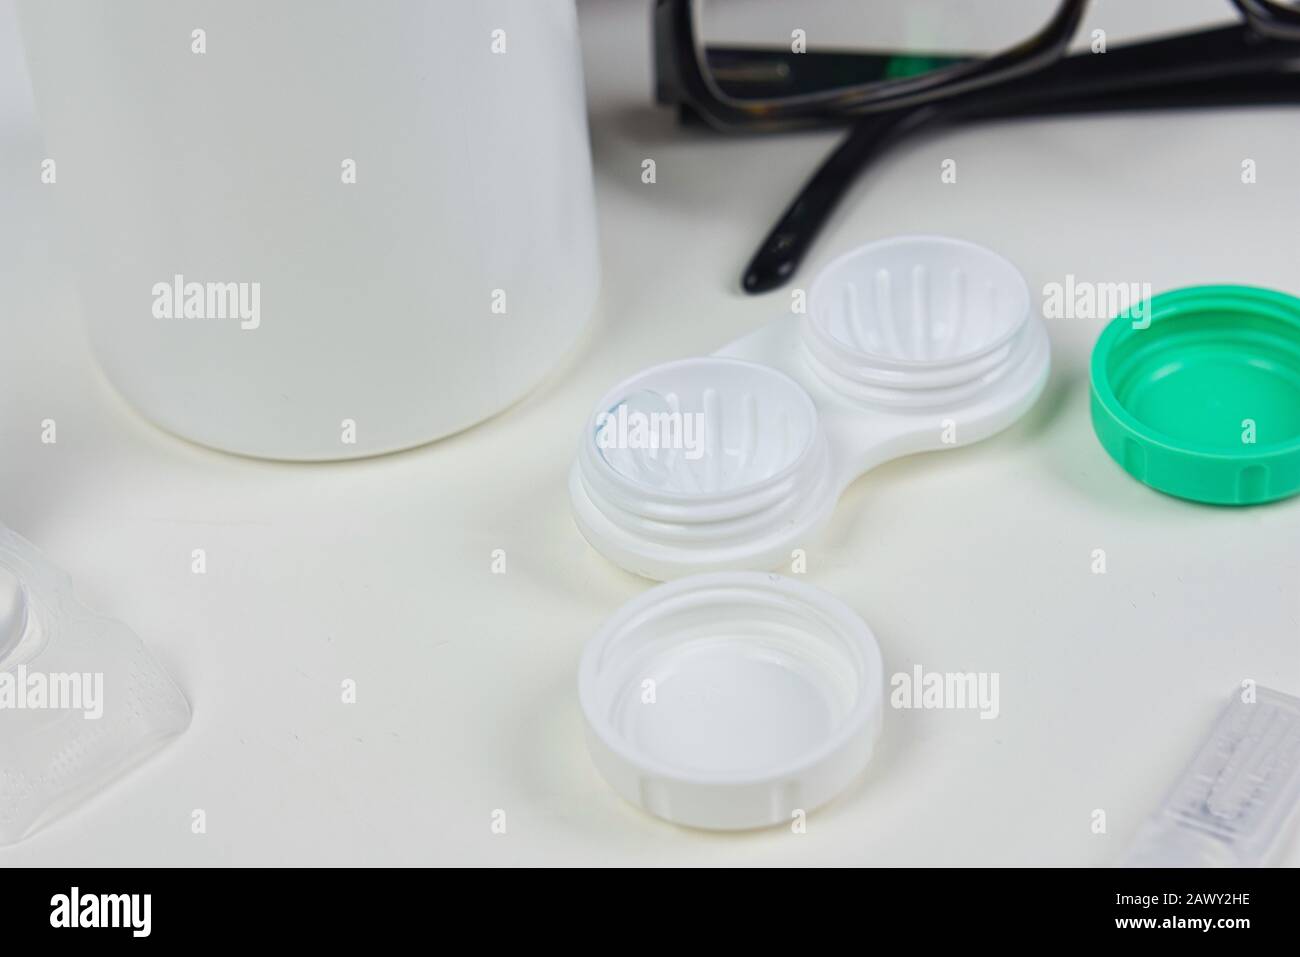 Contact lens case flat lay up close with other eye wear products including glasses and solution Stock Photo